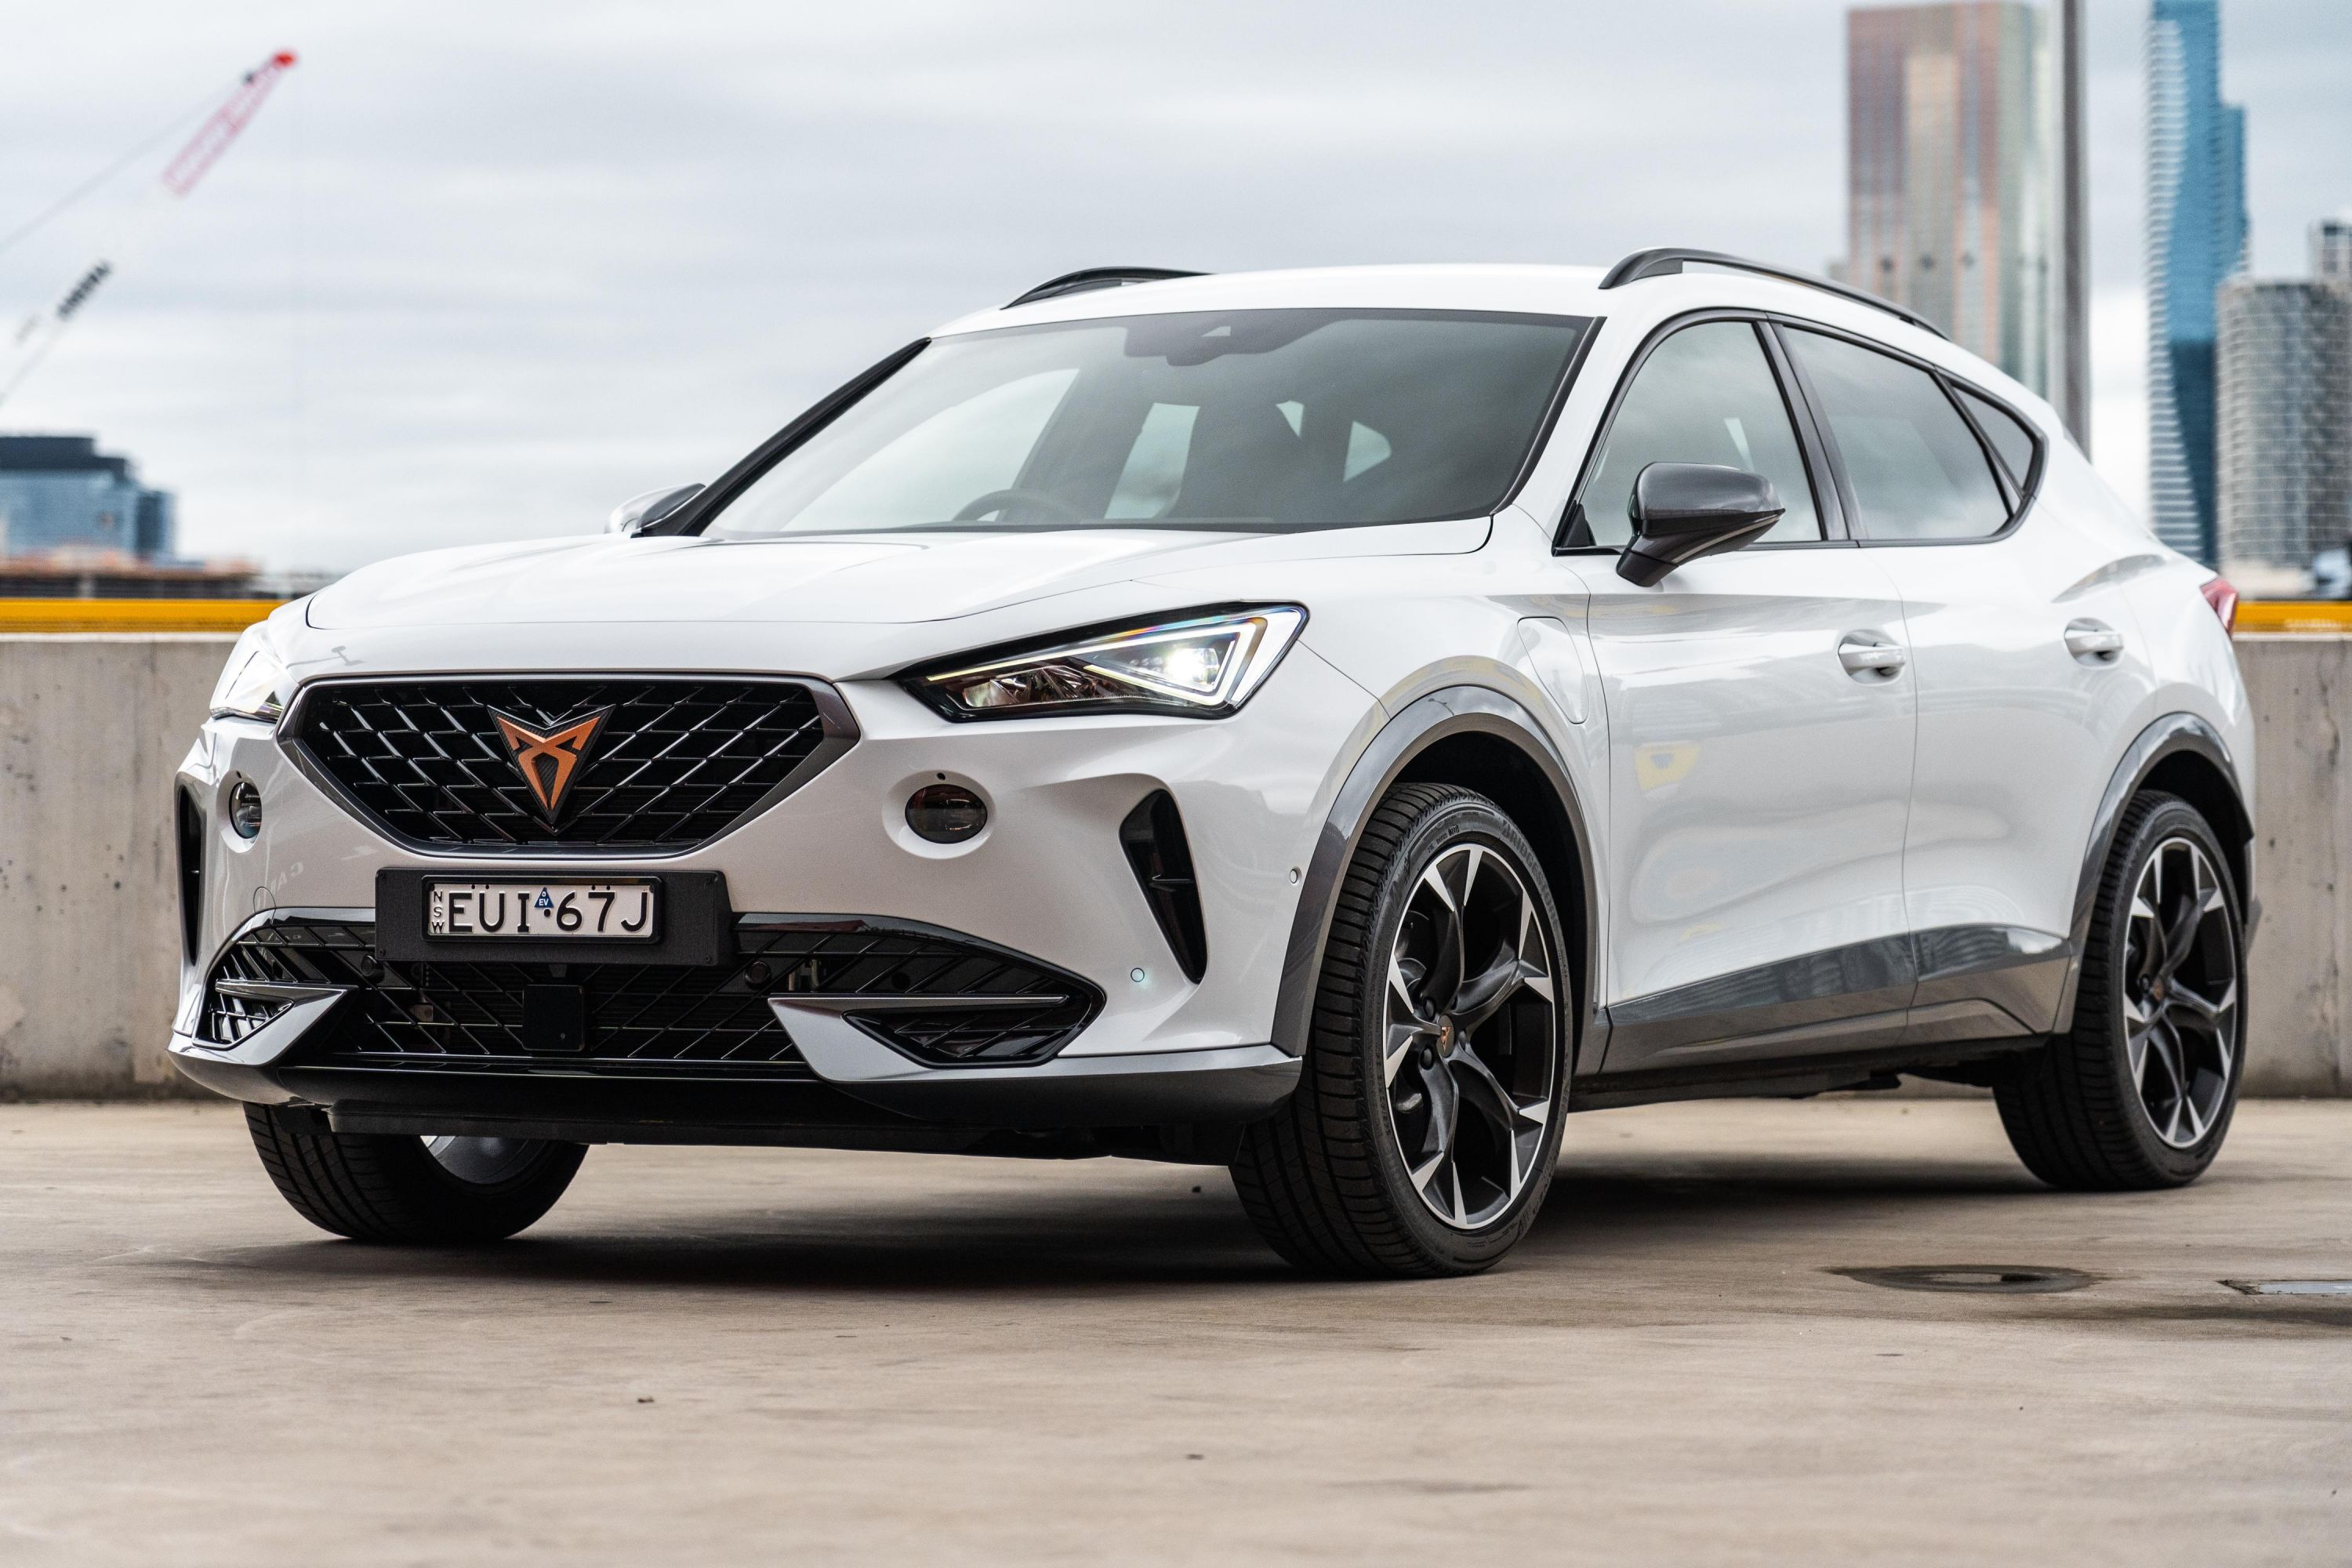 Car review: The Cupra Formentor e-Hybrid is a highly styled affair